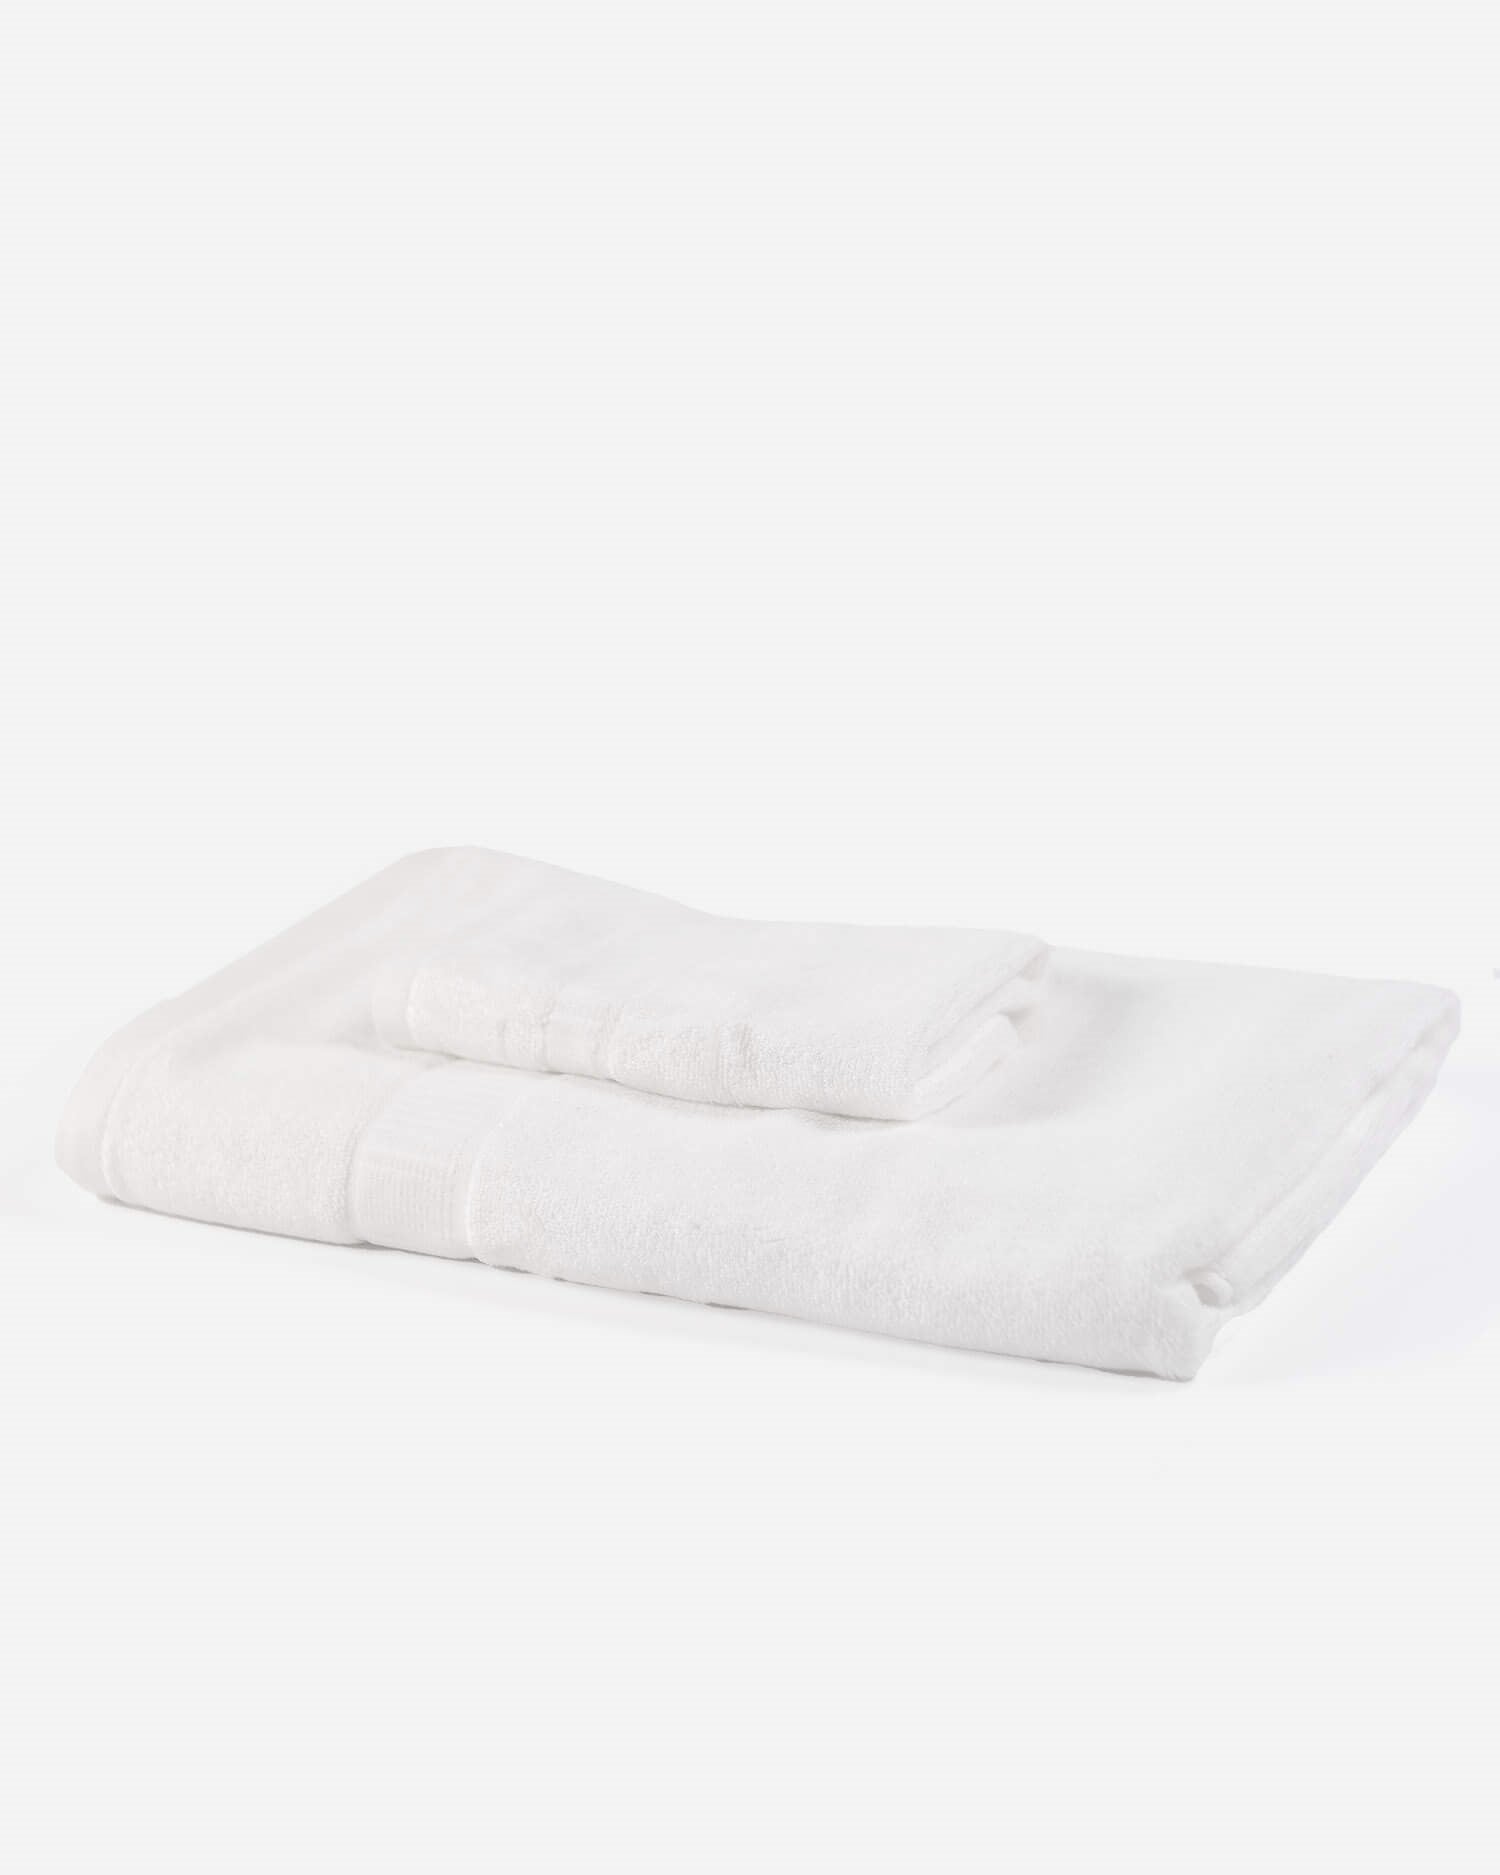 ava and ava ph organic bamboo face towel and bath towel white stack